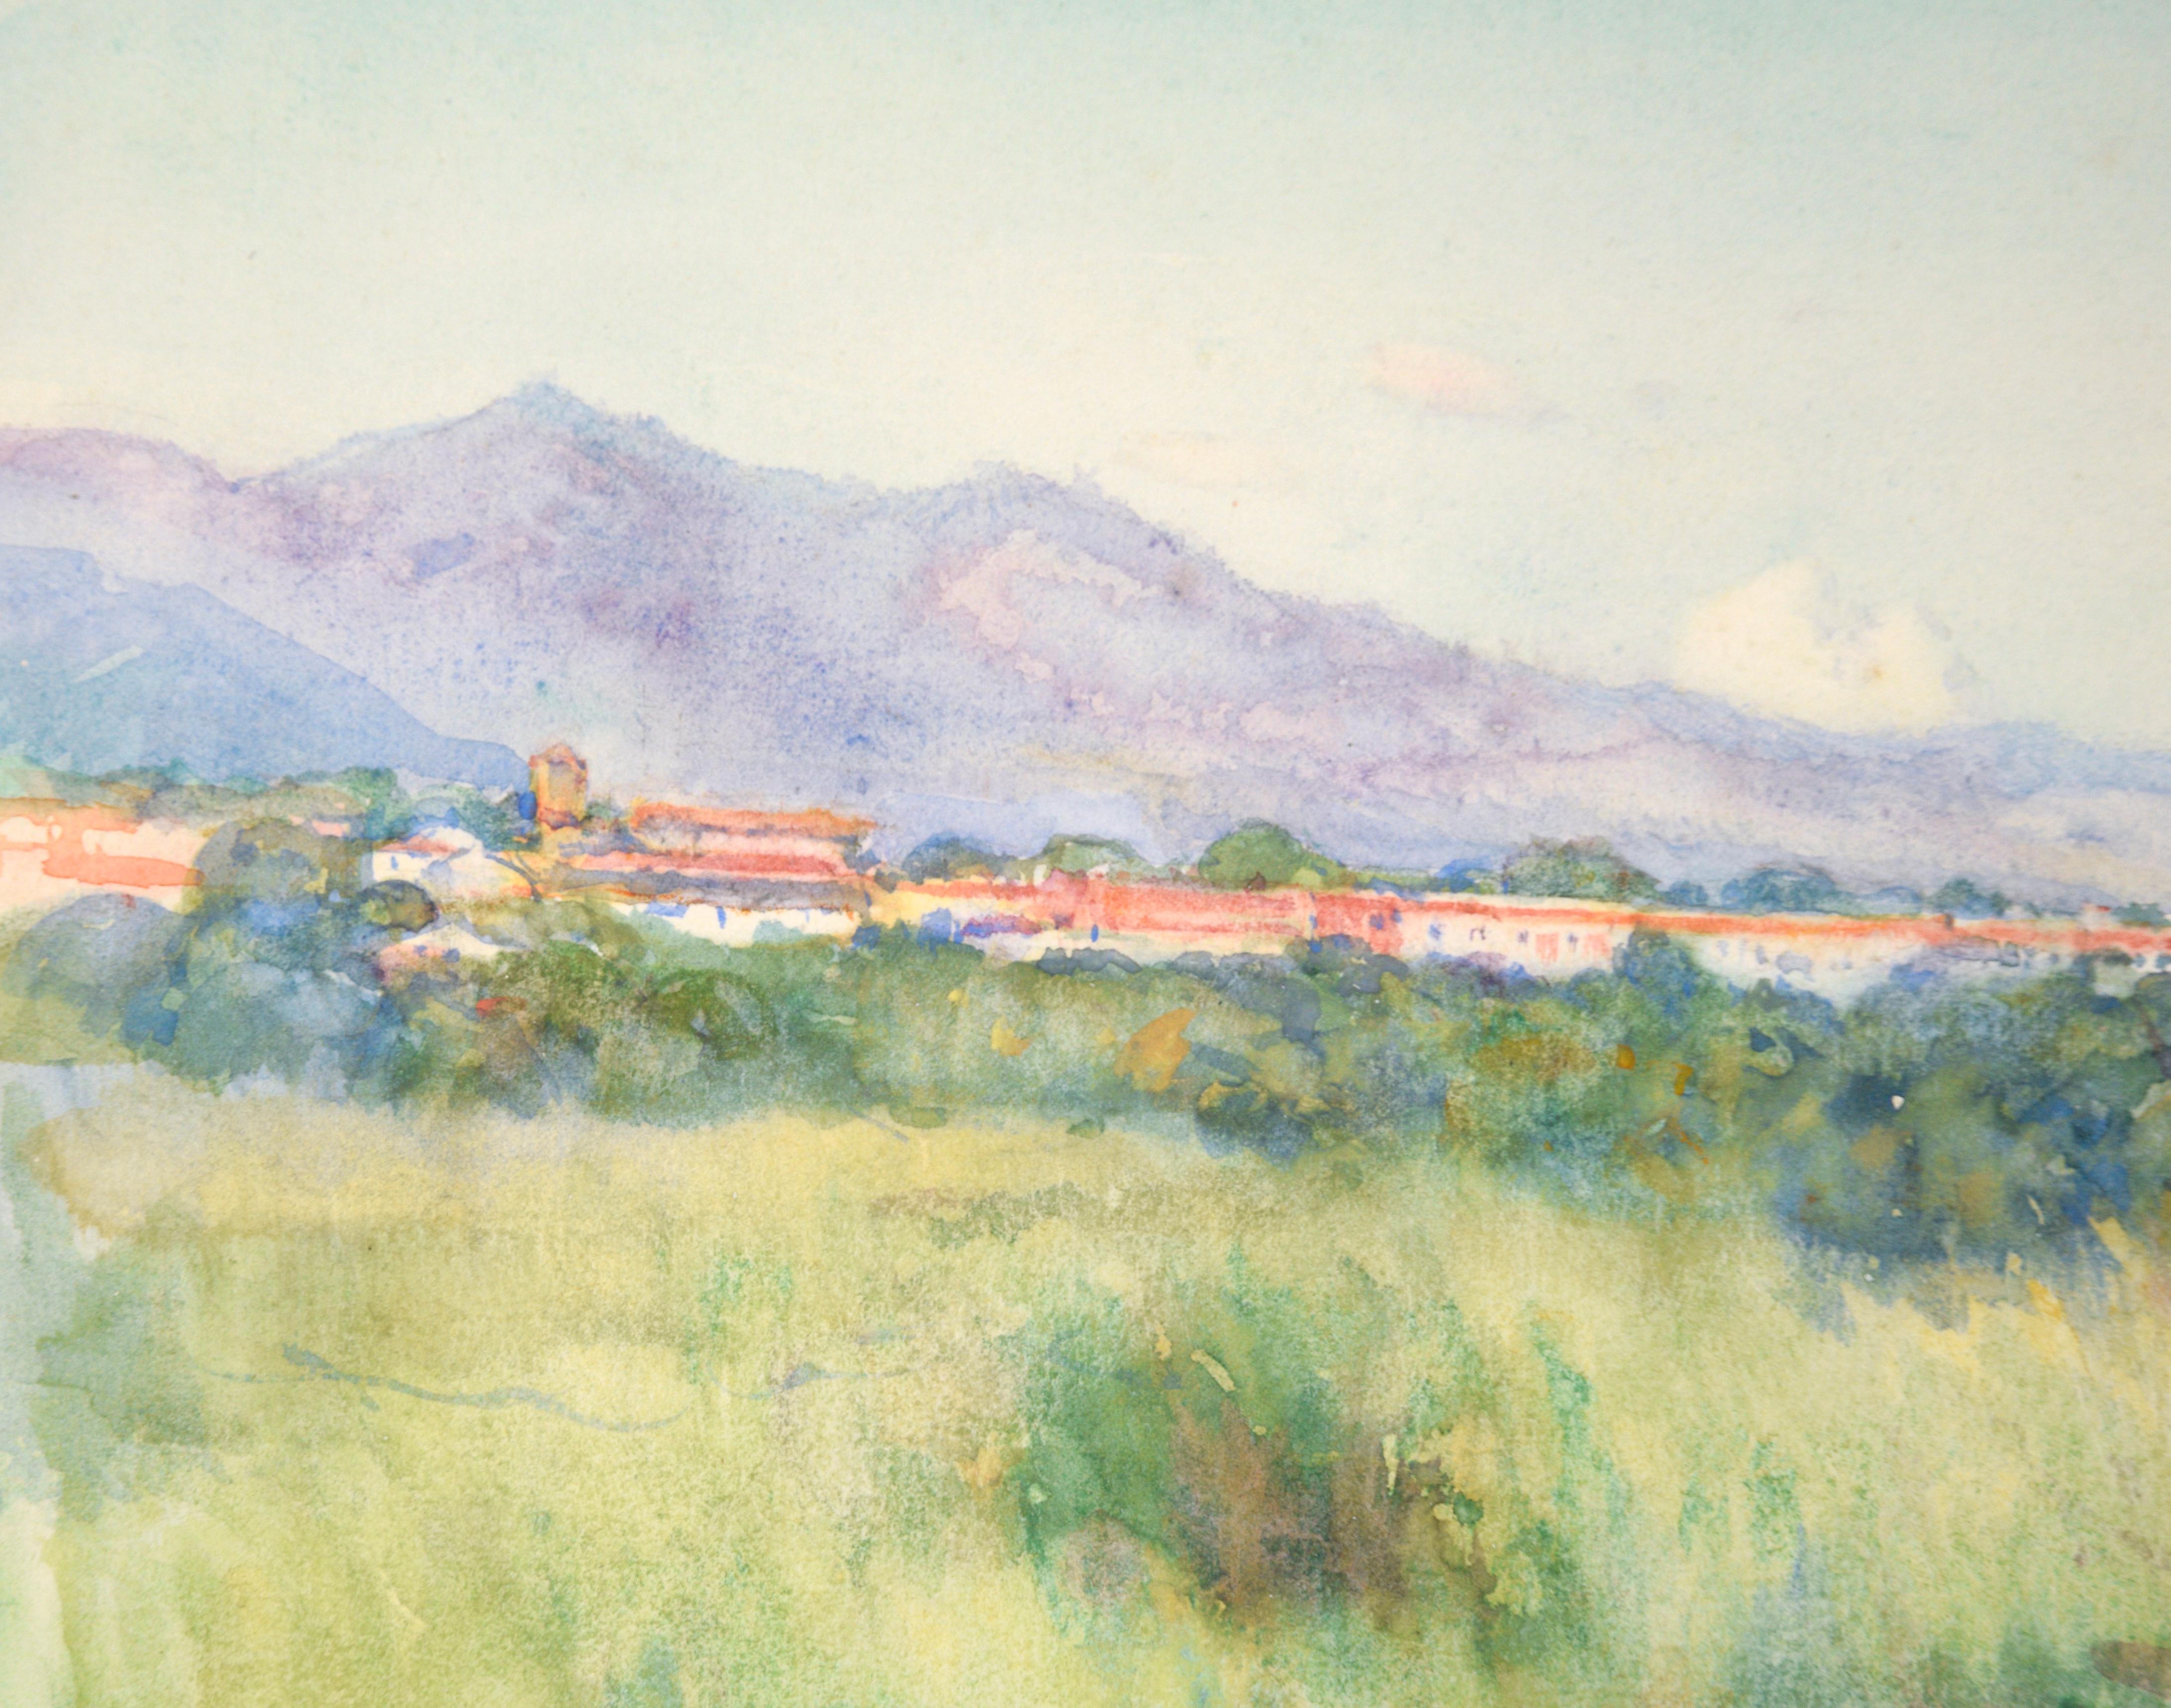 Idyllic watercolor of grassland and mountains in Cuba by Leonard Lester (English, 1870-1952). A large, grasy field stretches out from the viewer, lush and full of plants. At the far end there is a small group of buildings with red roofs. Beyond the